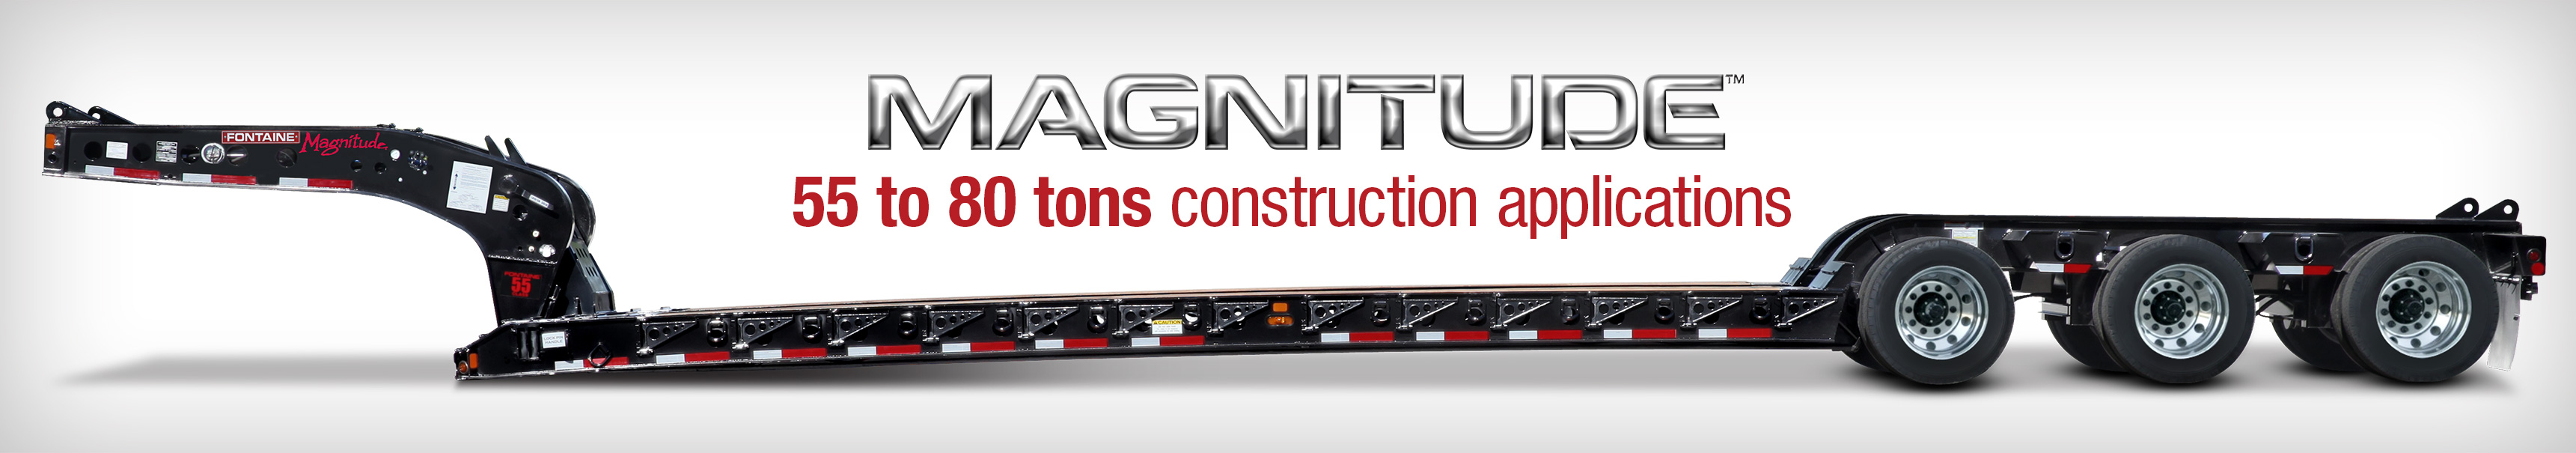 Fontaine Heavy-Haul Magnitude lowboy trailers for construction industry